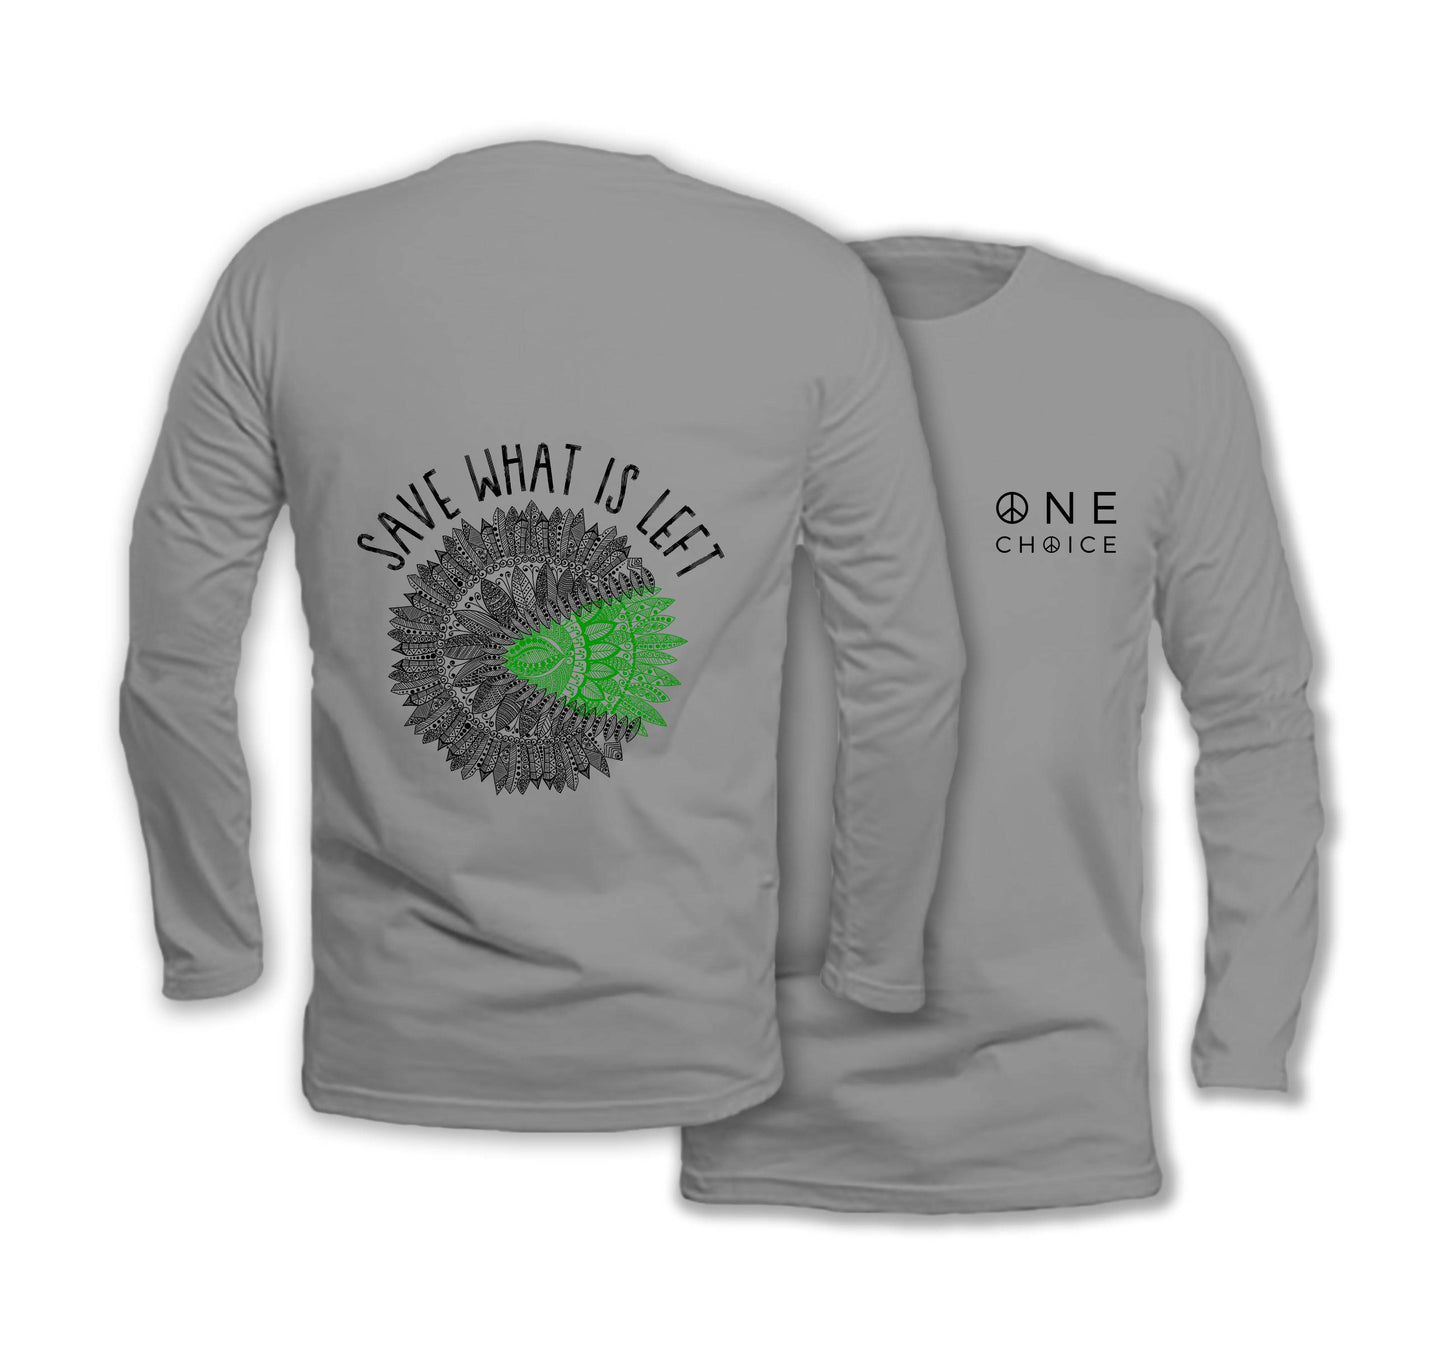 Save What's Left - Long Sleeve Organic Cotton T-Shirt - One Choice Apparel